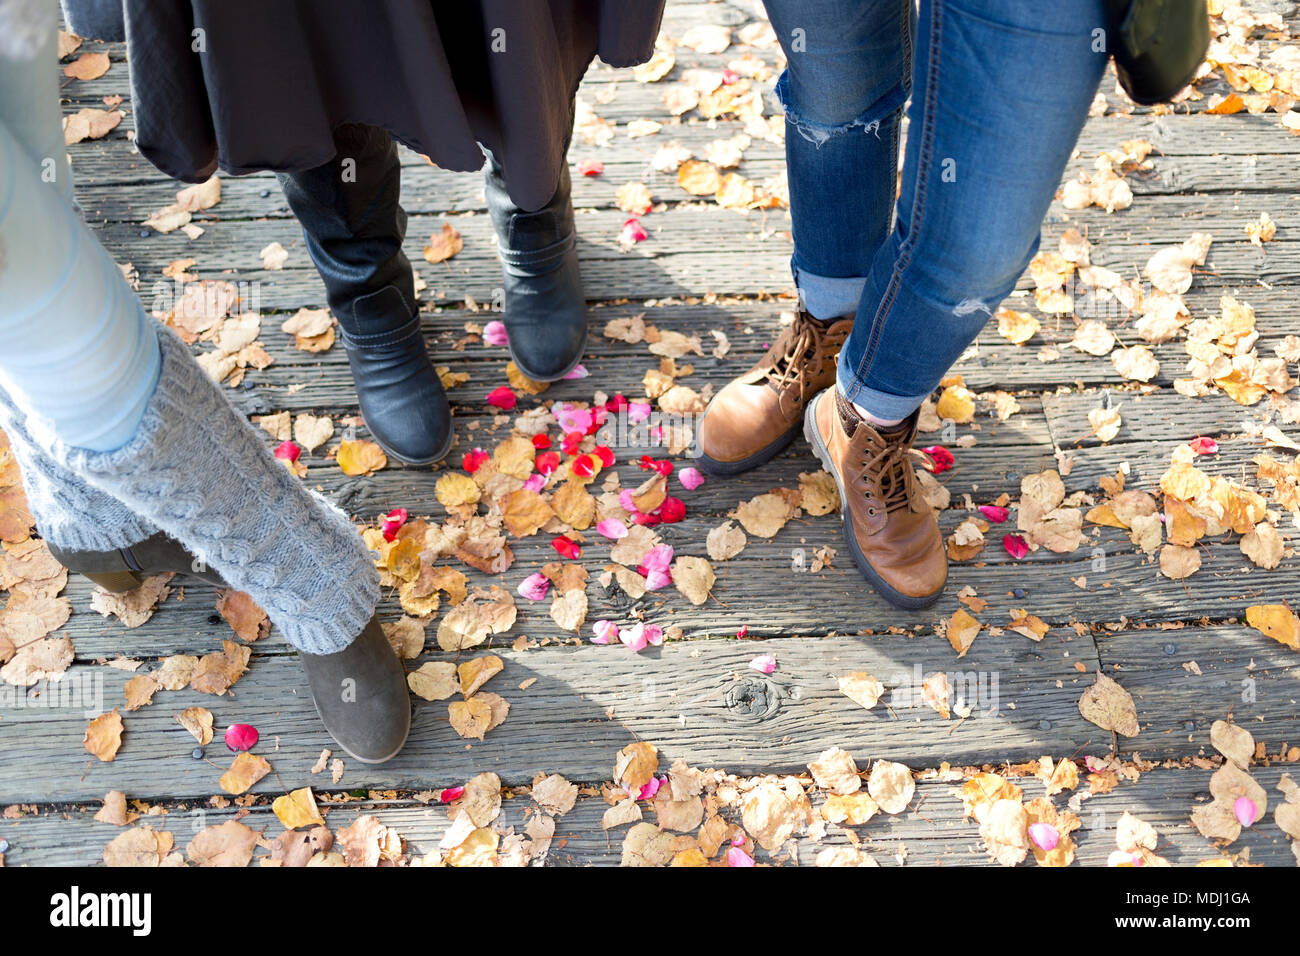 Footwear and legs of three women standing on a boardwalk in autumn; New Westminster, British Columbia, Canada Stock Photo